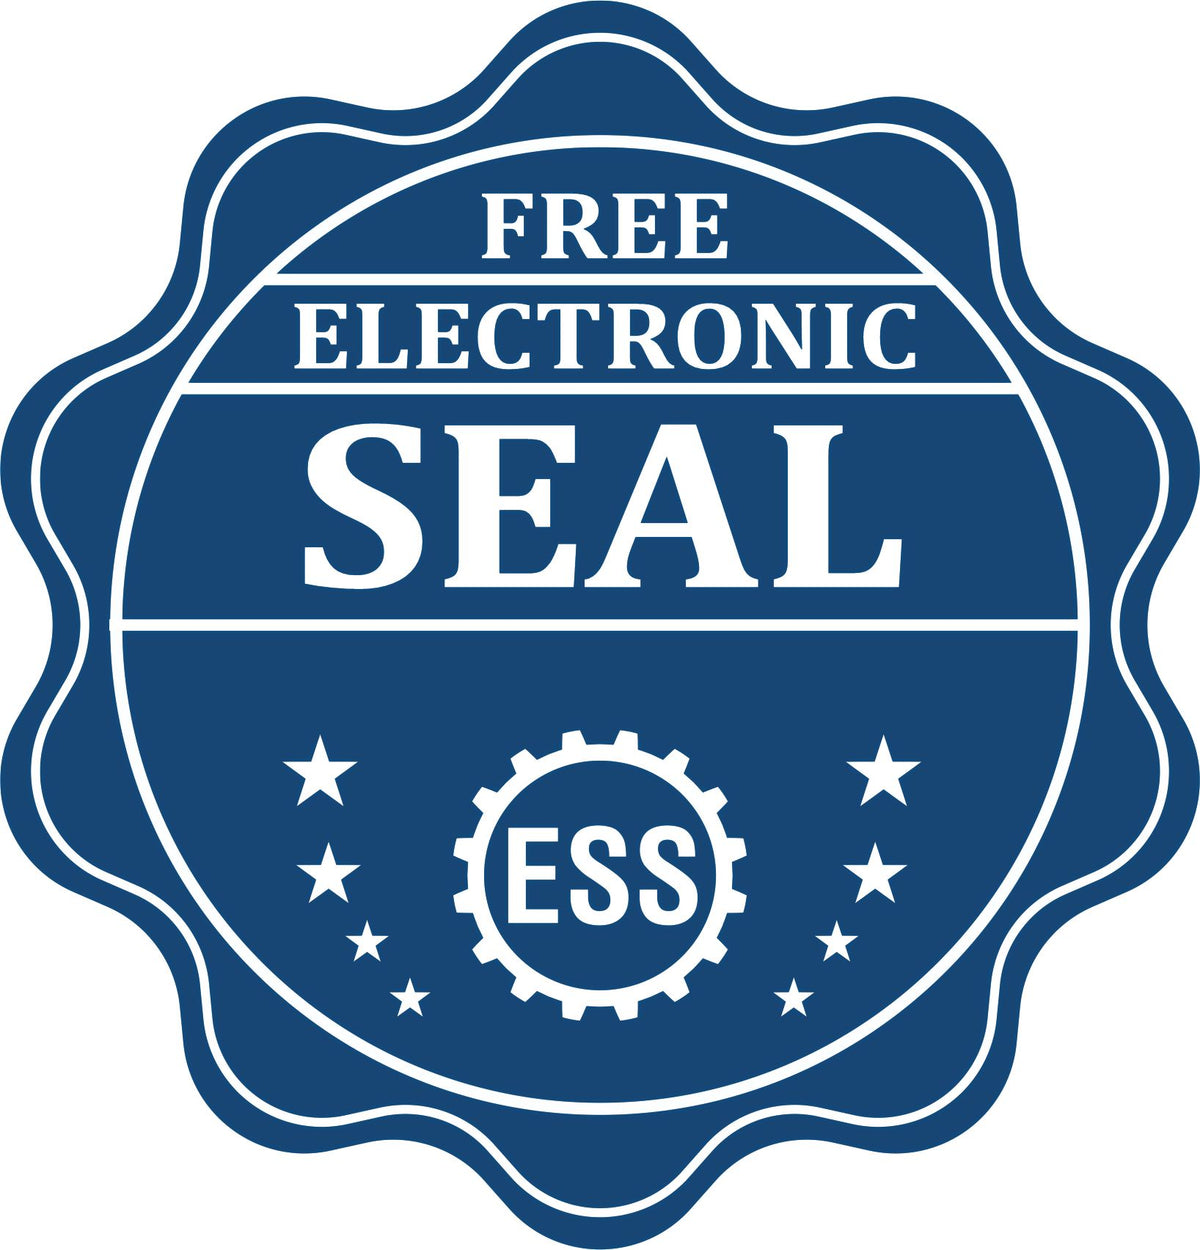 A badge showing a free electronic seal for the Hybrid Maryland Architect Seal with stars and the ESS gear on the emblem.